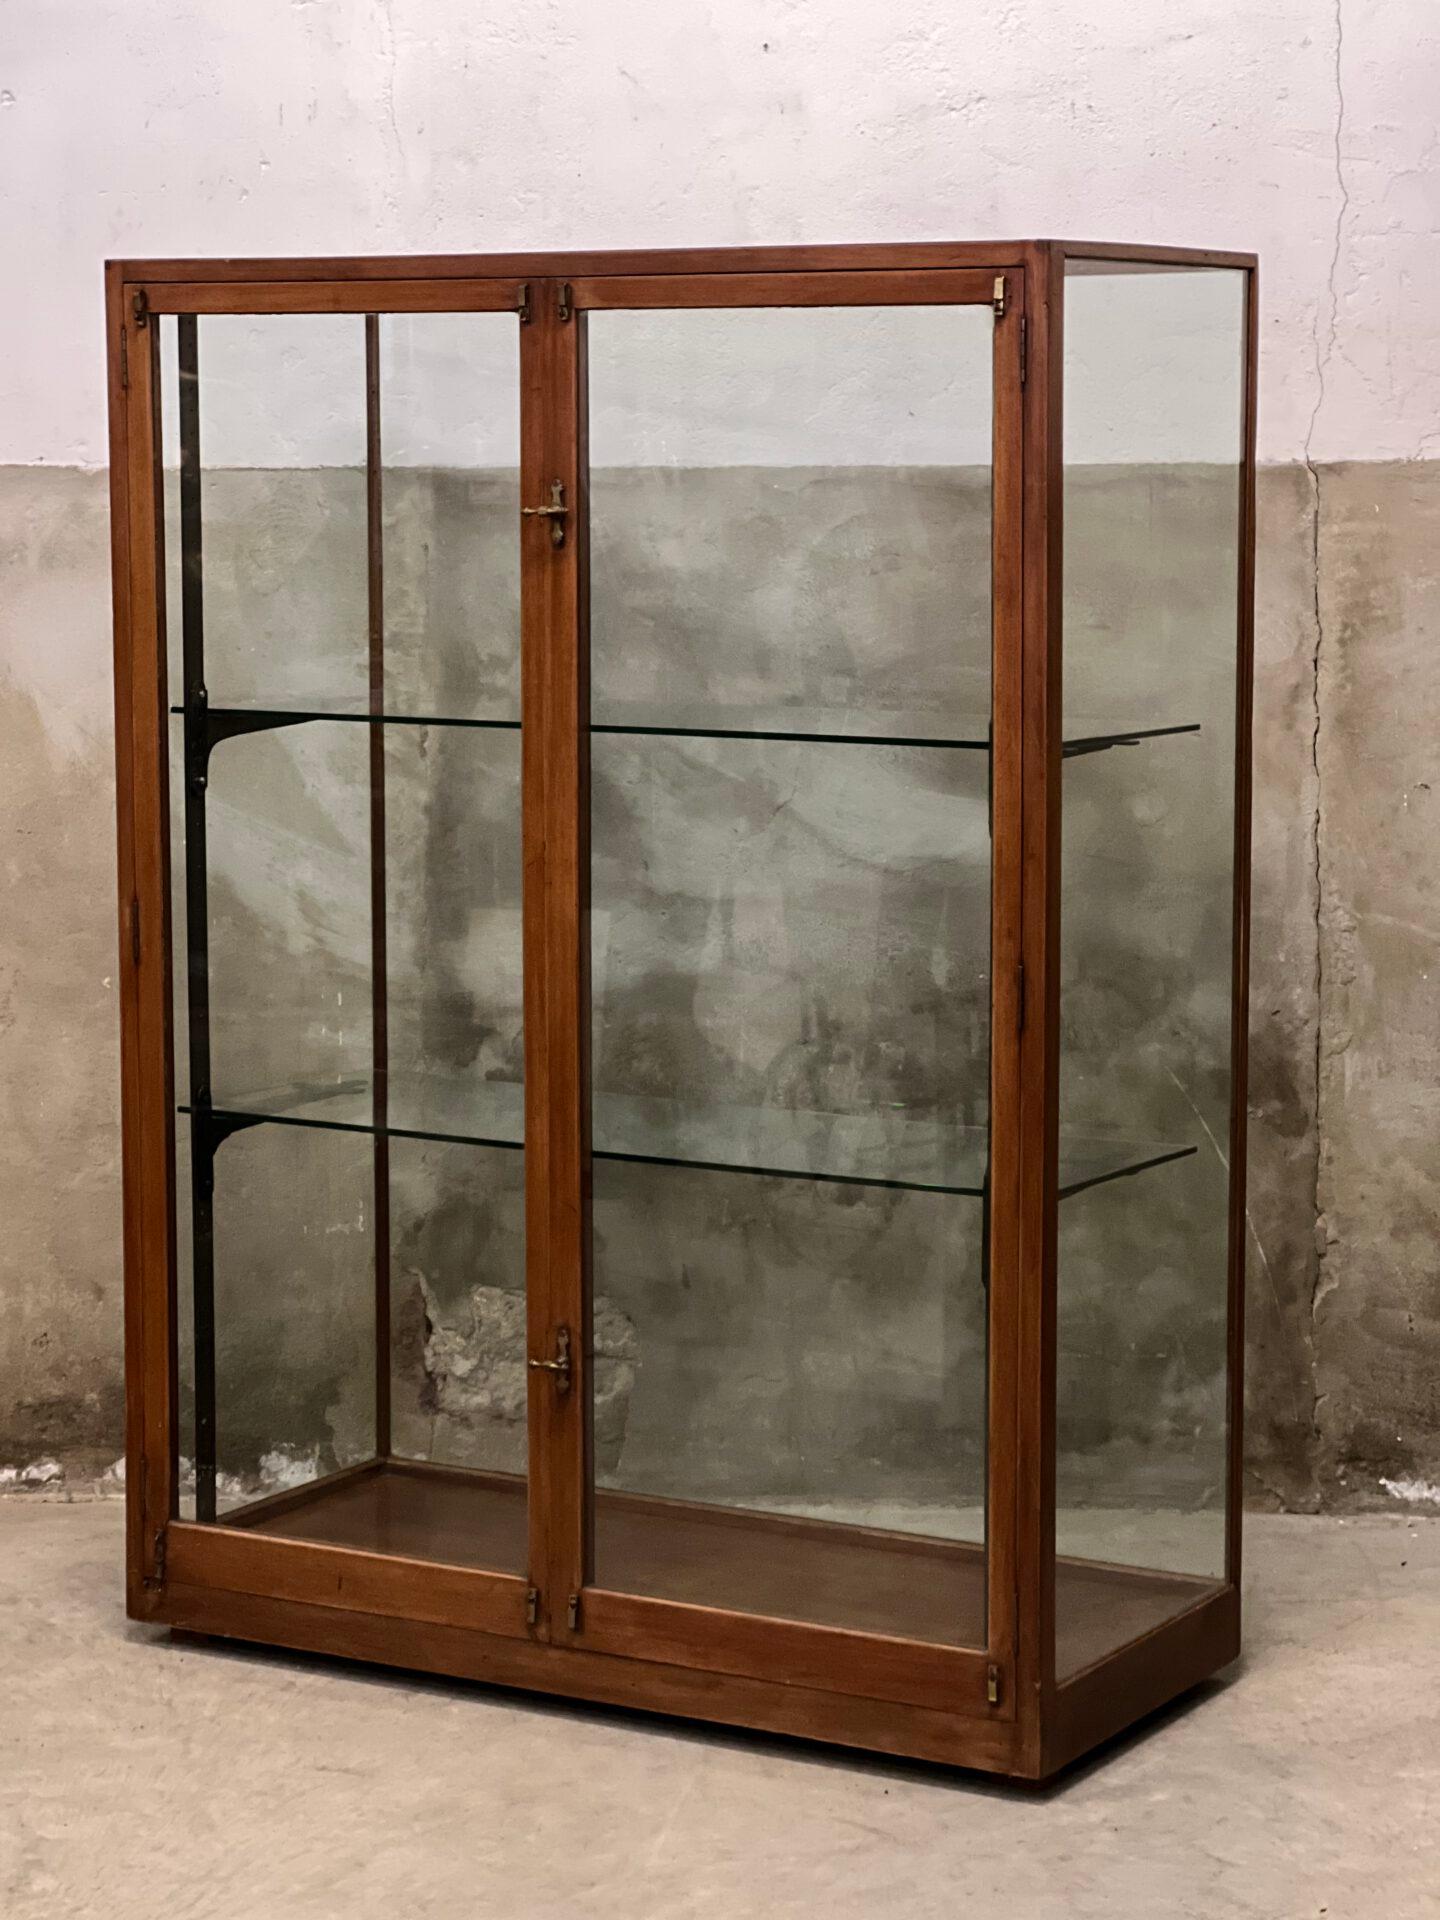 Other Late 19th Century, English Museum Display Case, Vitrine